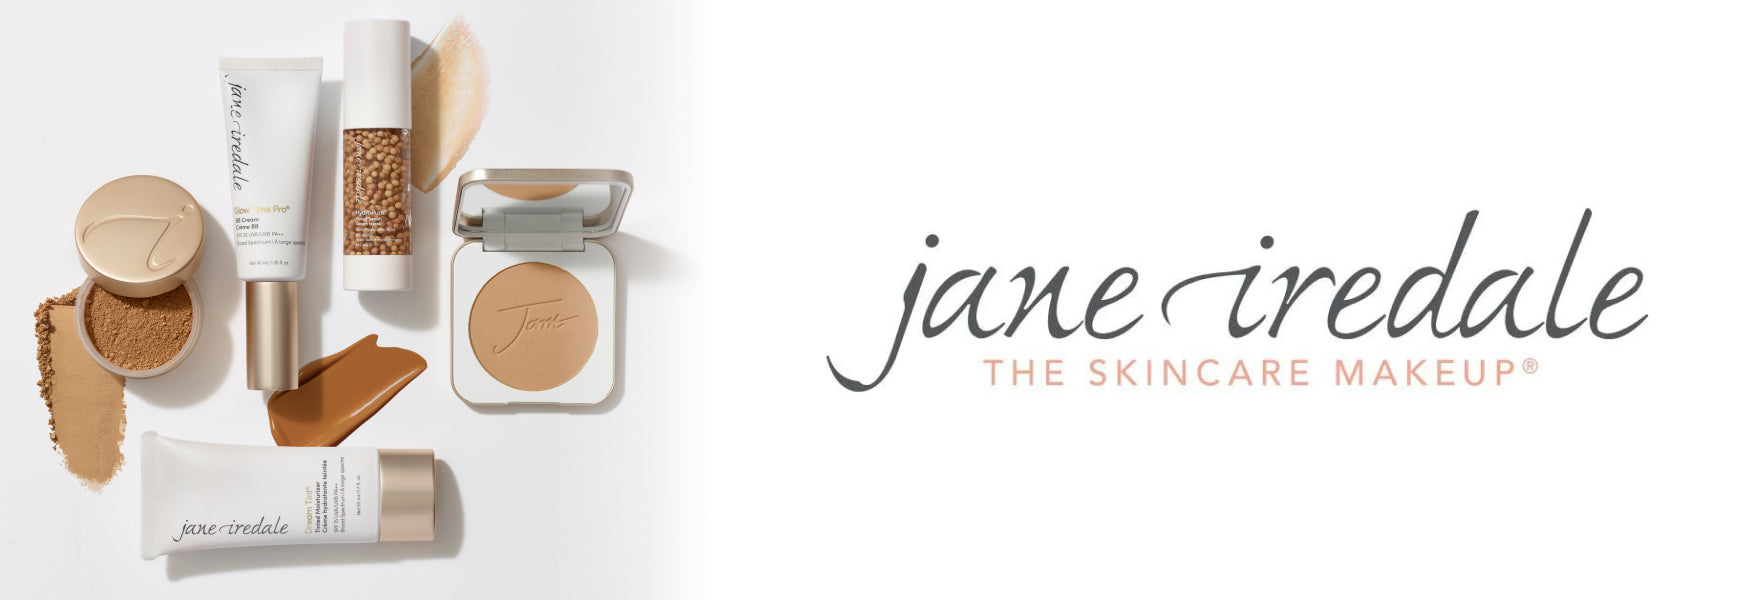 Several jane iredale products on a white background with the jane iredale logo.